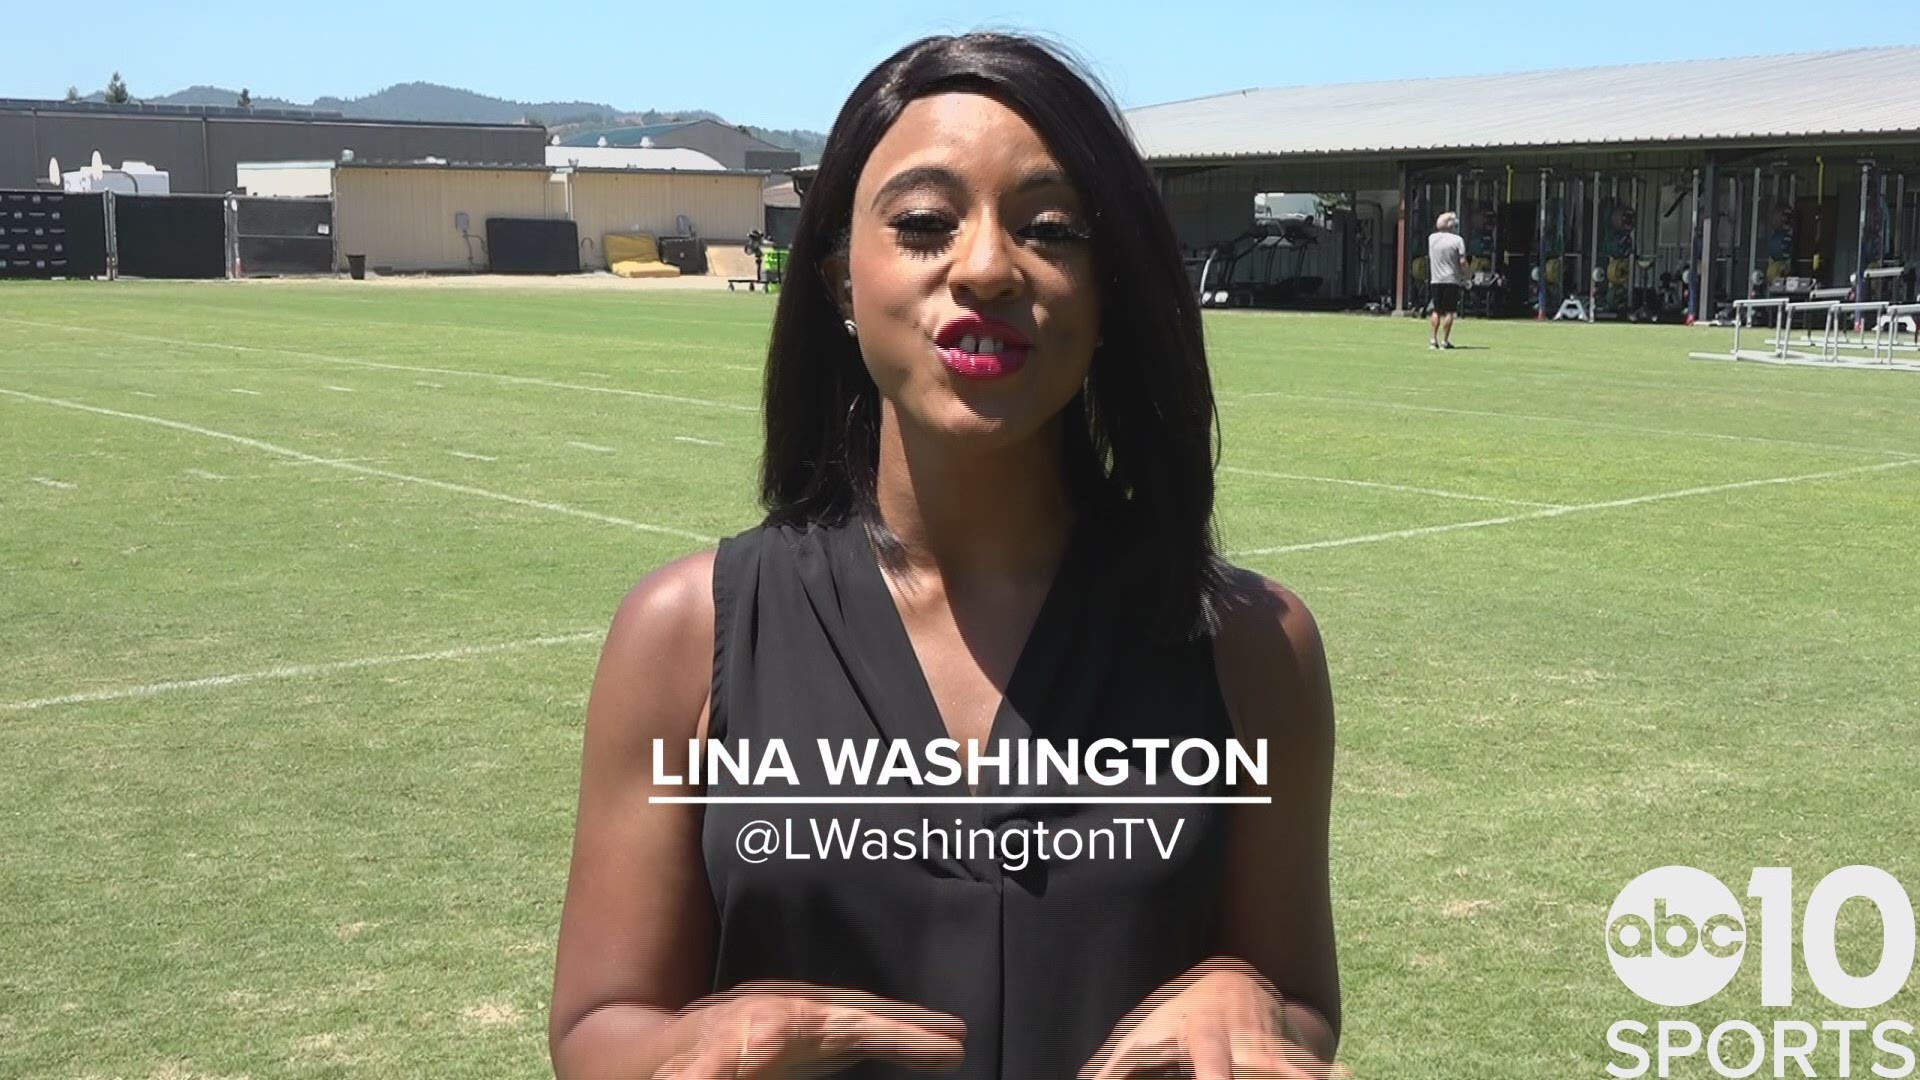 ABC10's Lina Washington heads to Raiders Training Camp in Napa for a preview of what's to come this season in Oakland.